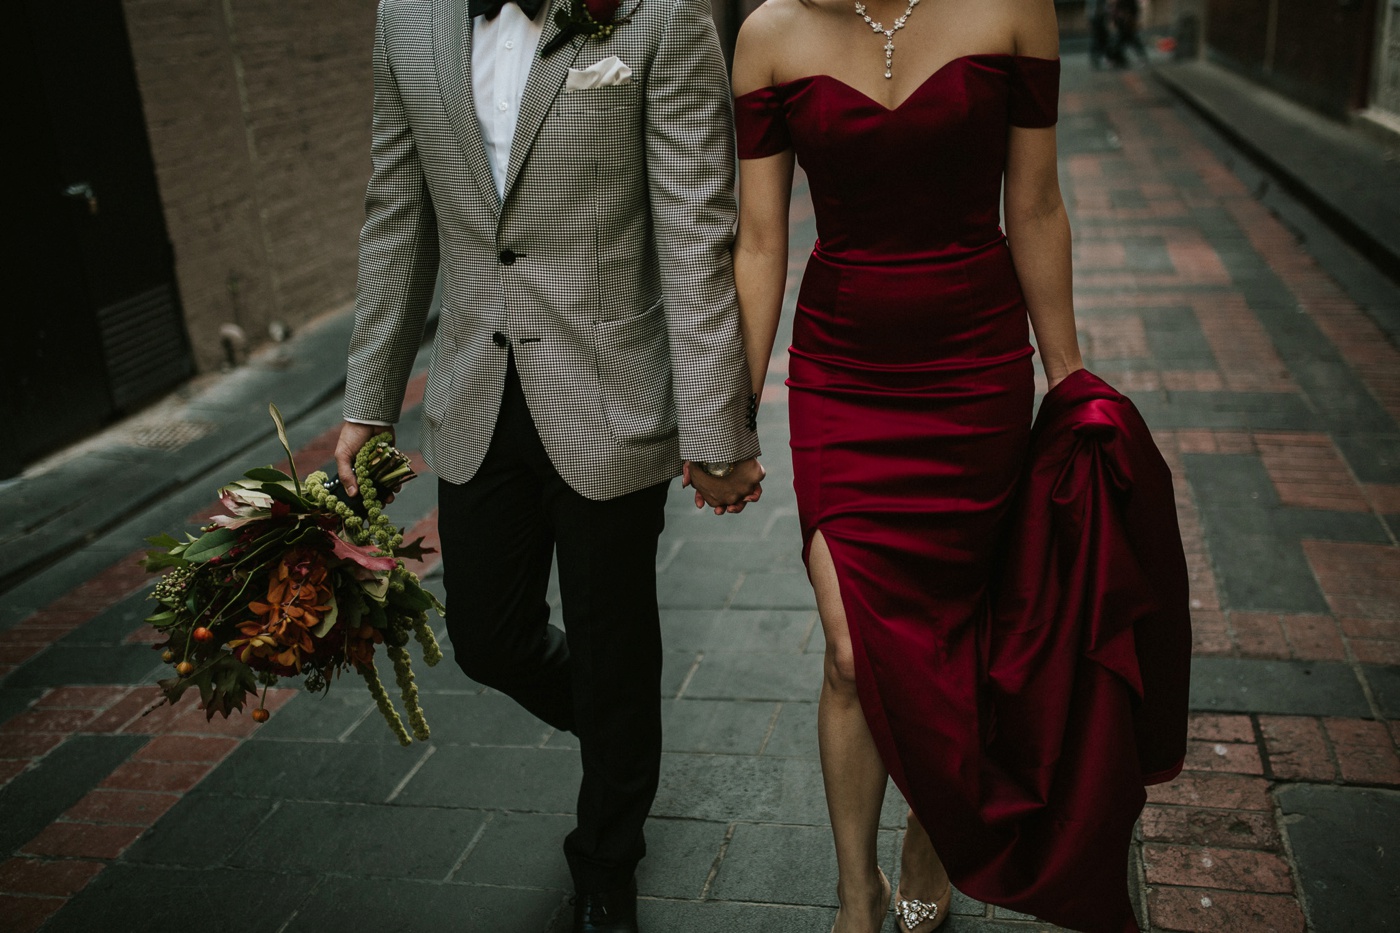 annie-kenneth_melbourne-cbd-candid-relaxed-wedding-photography_tea-ceremony_46